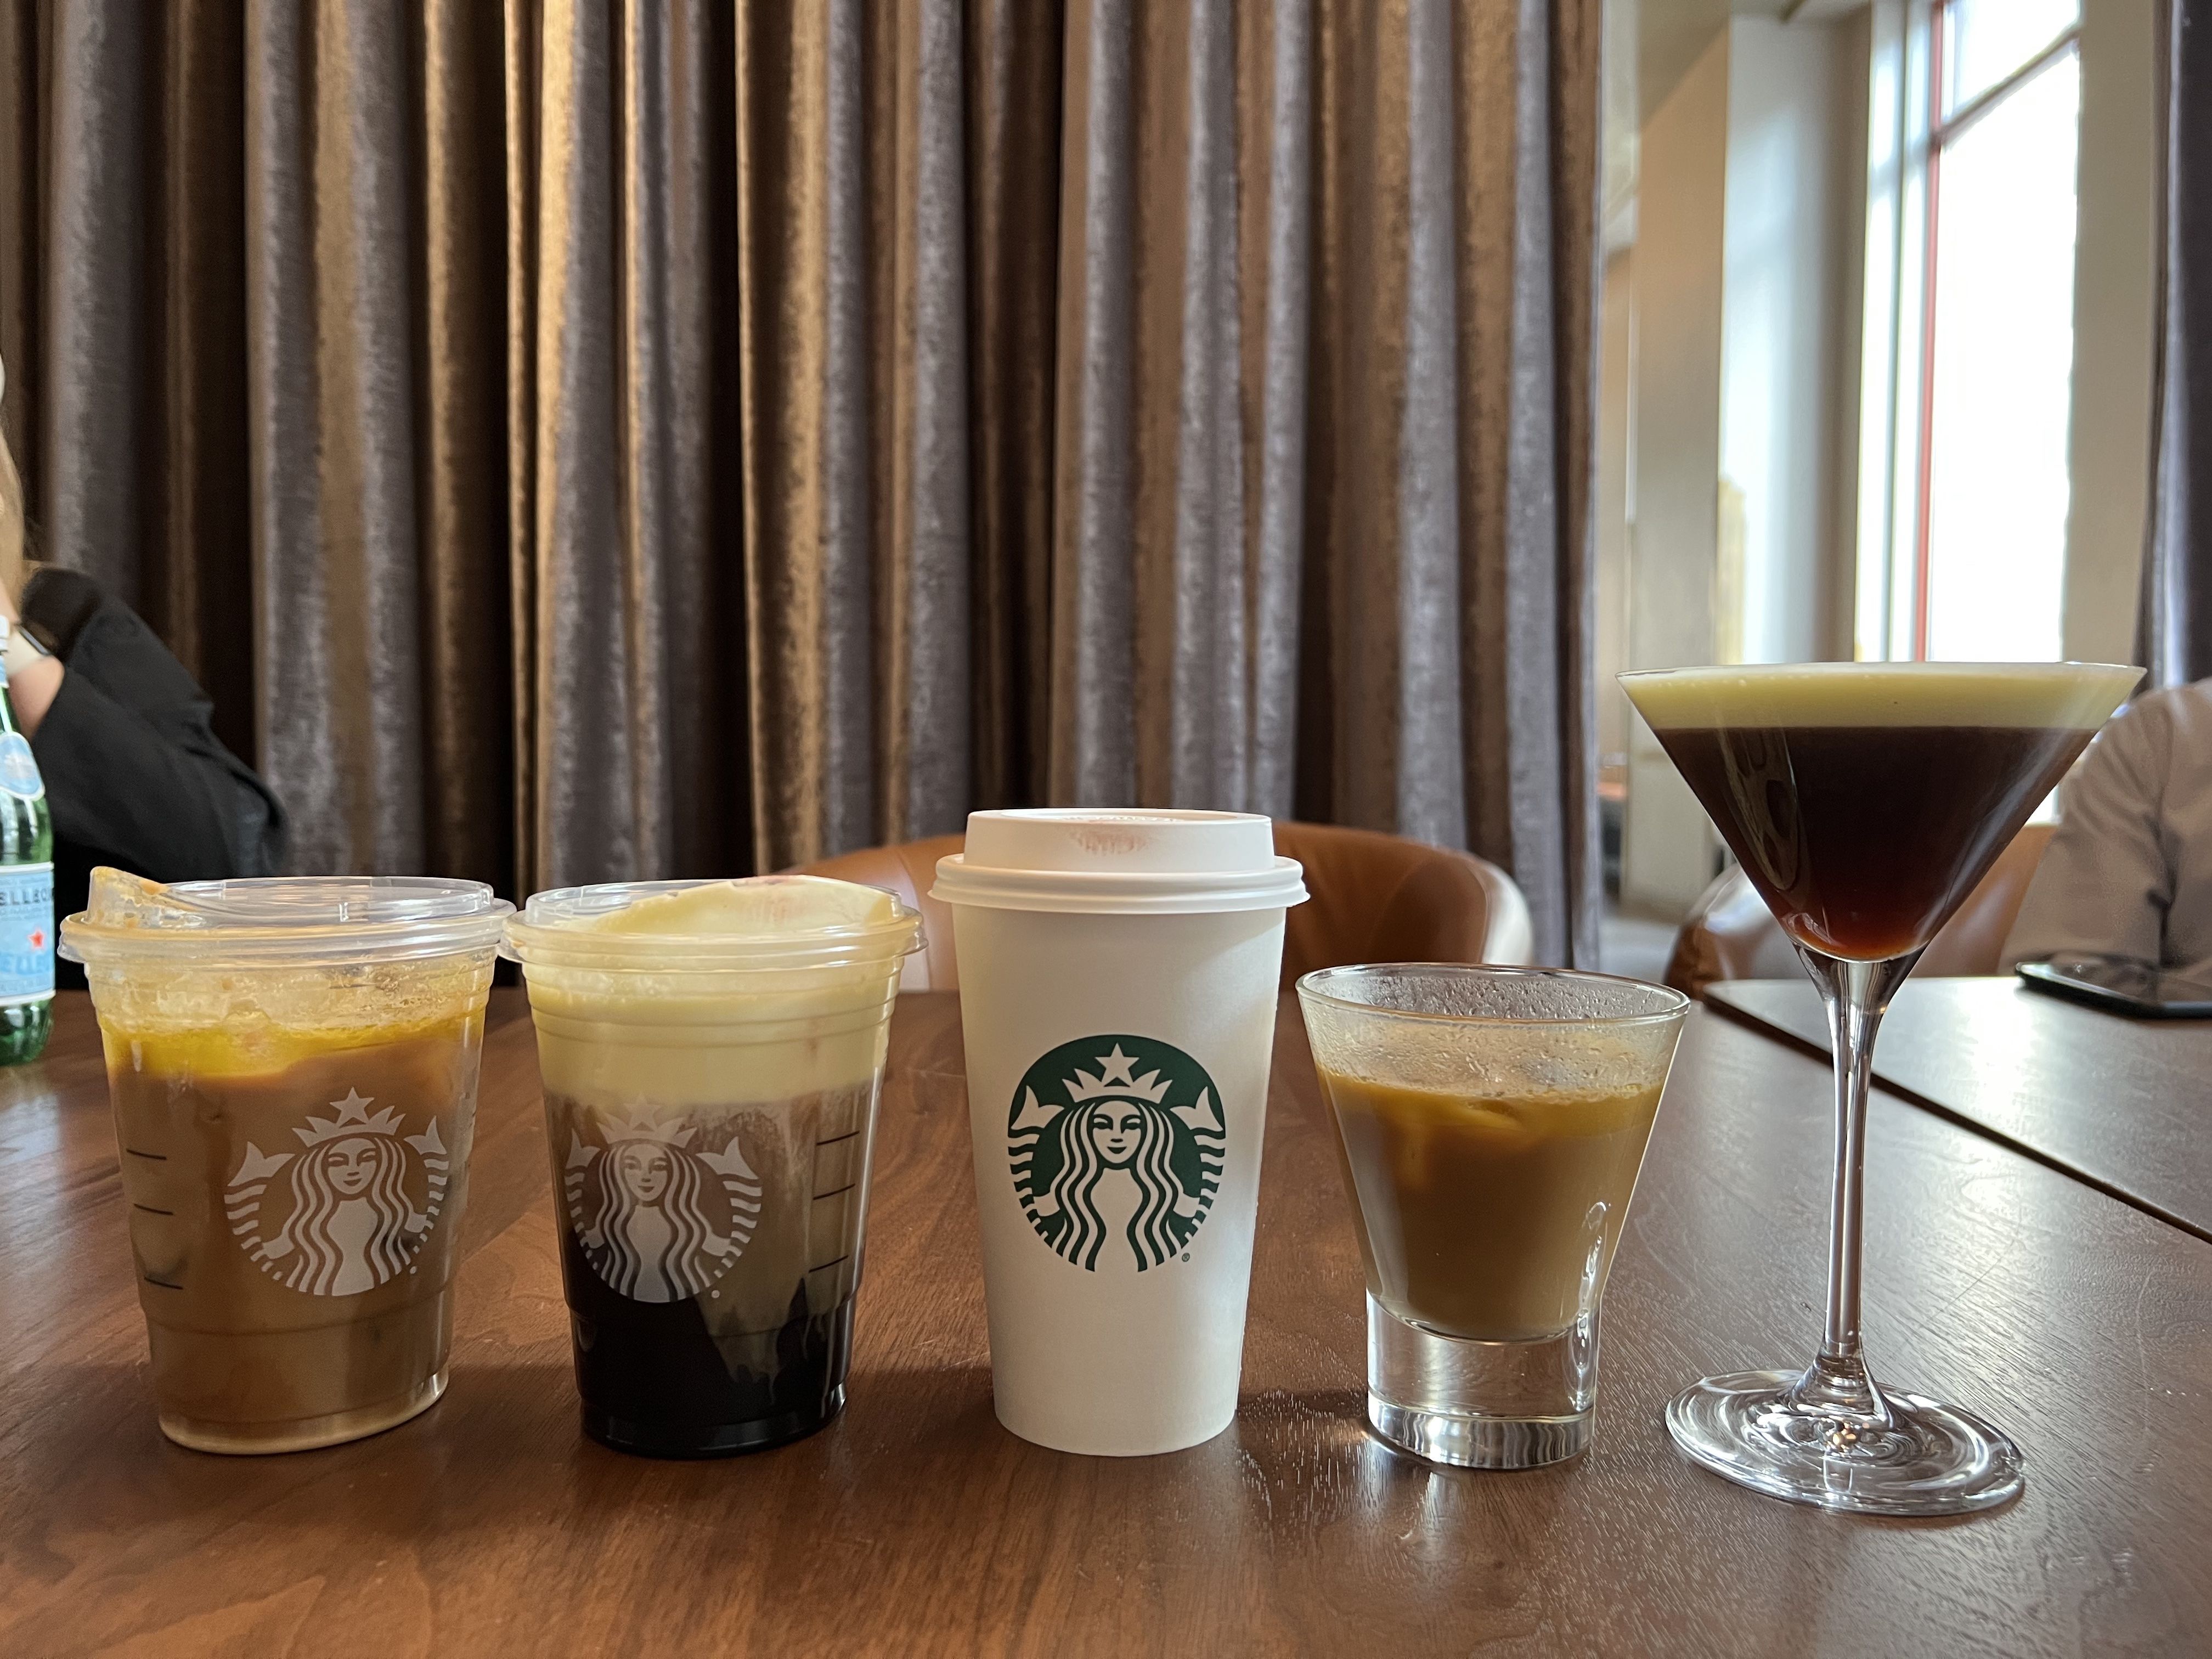 Starbucks' Oleato Review: How Olive Oil Coffee Actually Tastes - Let's Eat  Cake